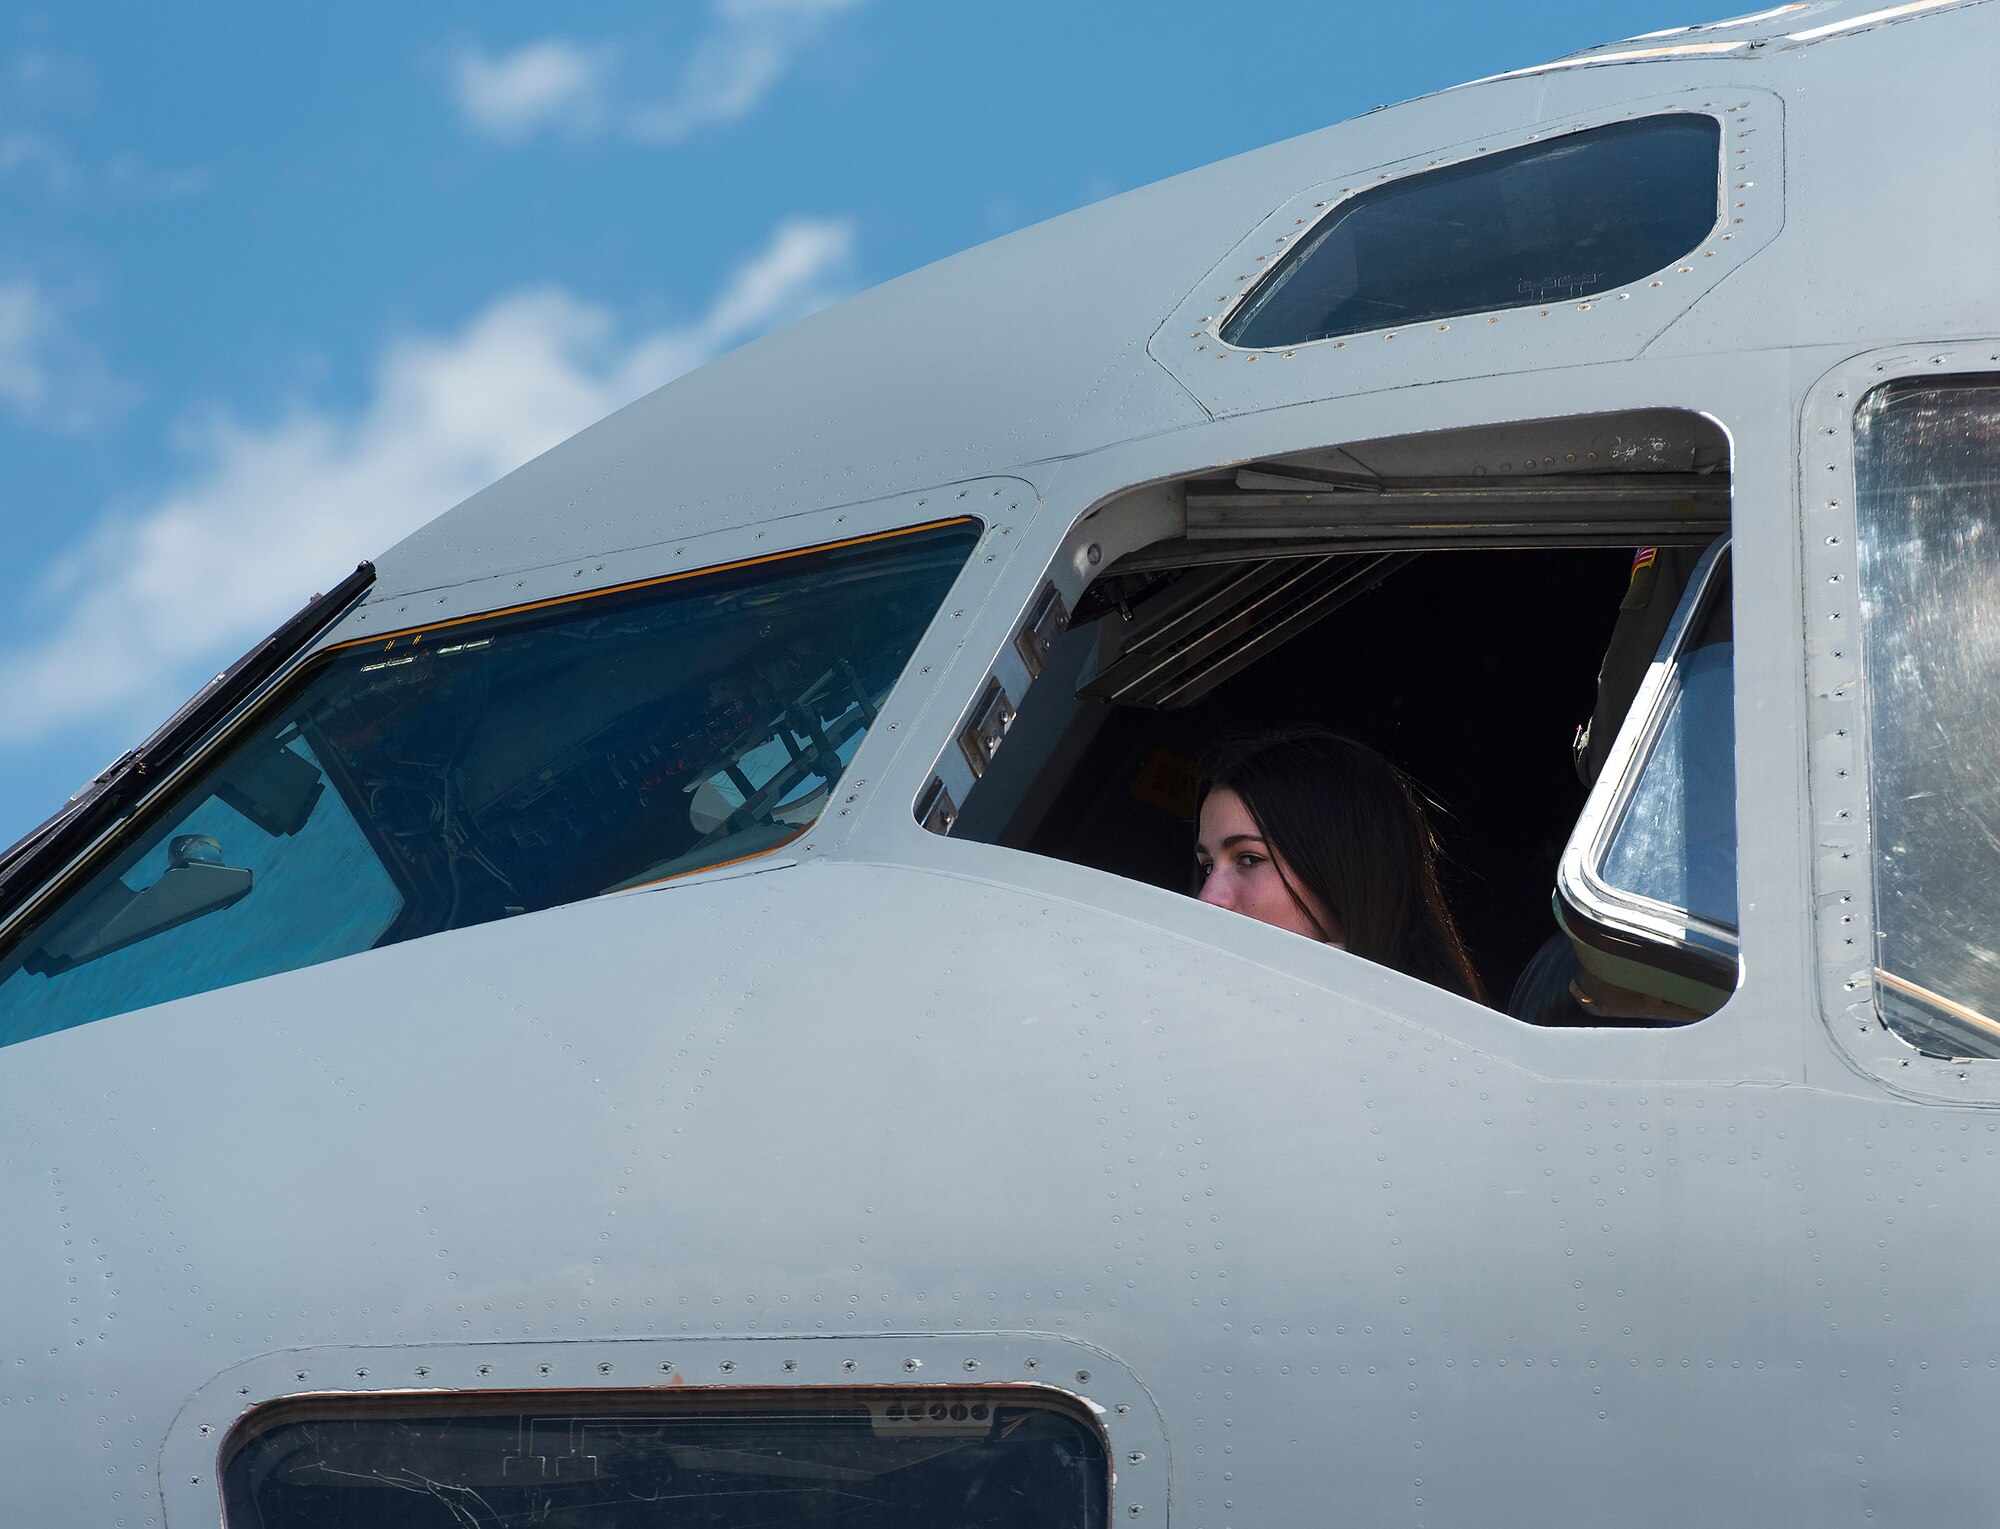 A camper looks out the cockpit window of a C-17 Globemaster III aircraft June 14, 2021, at Wright-Patterson Air Force Base, Ohio. She was taking part in Air Camp, a STEM program set up to raise interest in aviation among middle  school students. (U.S. Air Force photo by R.J. Oriez)